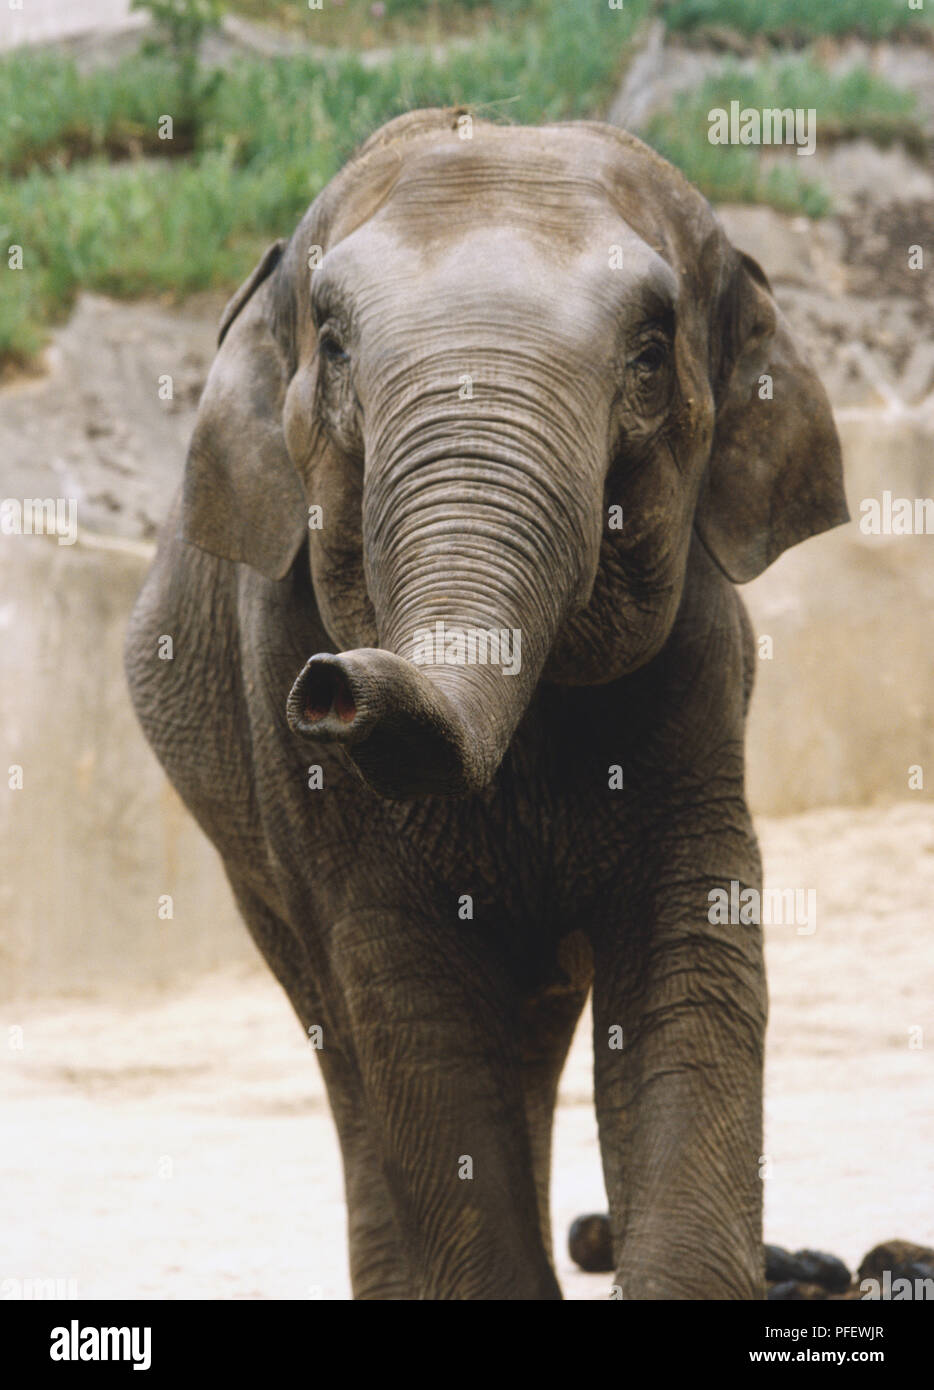 African elephant in an enclosure points its trunk towards the camera. Stock Photo